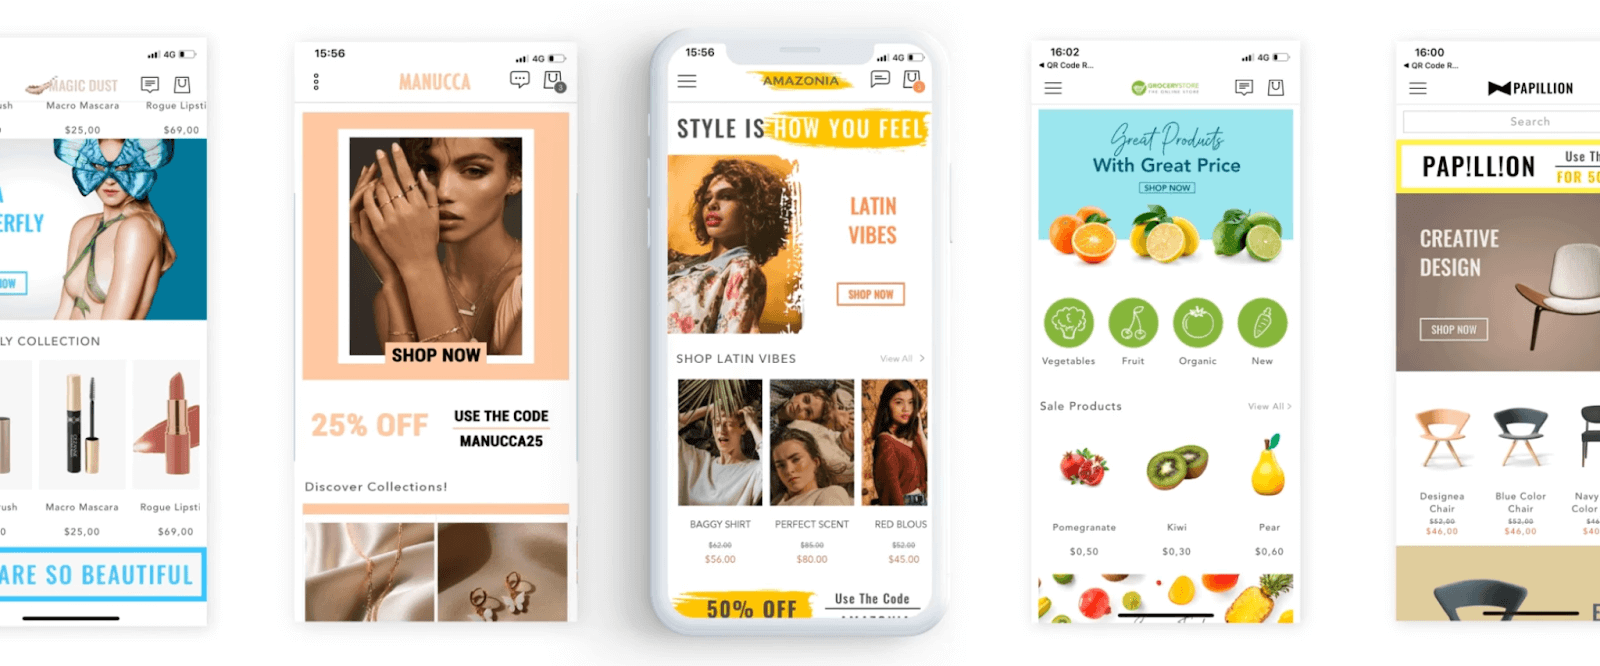 Mobile app samples created by Shopney